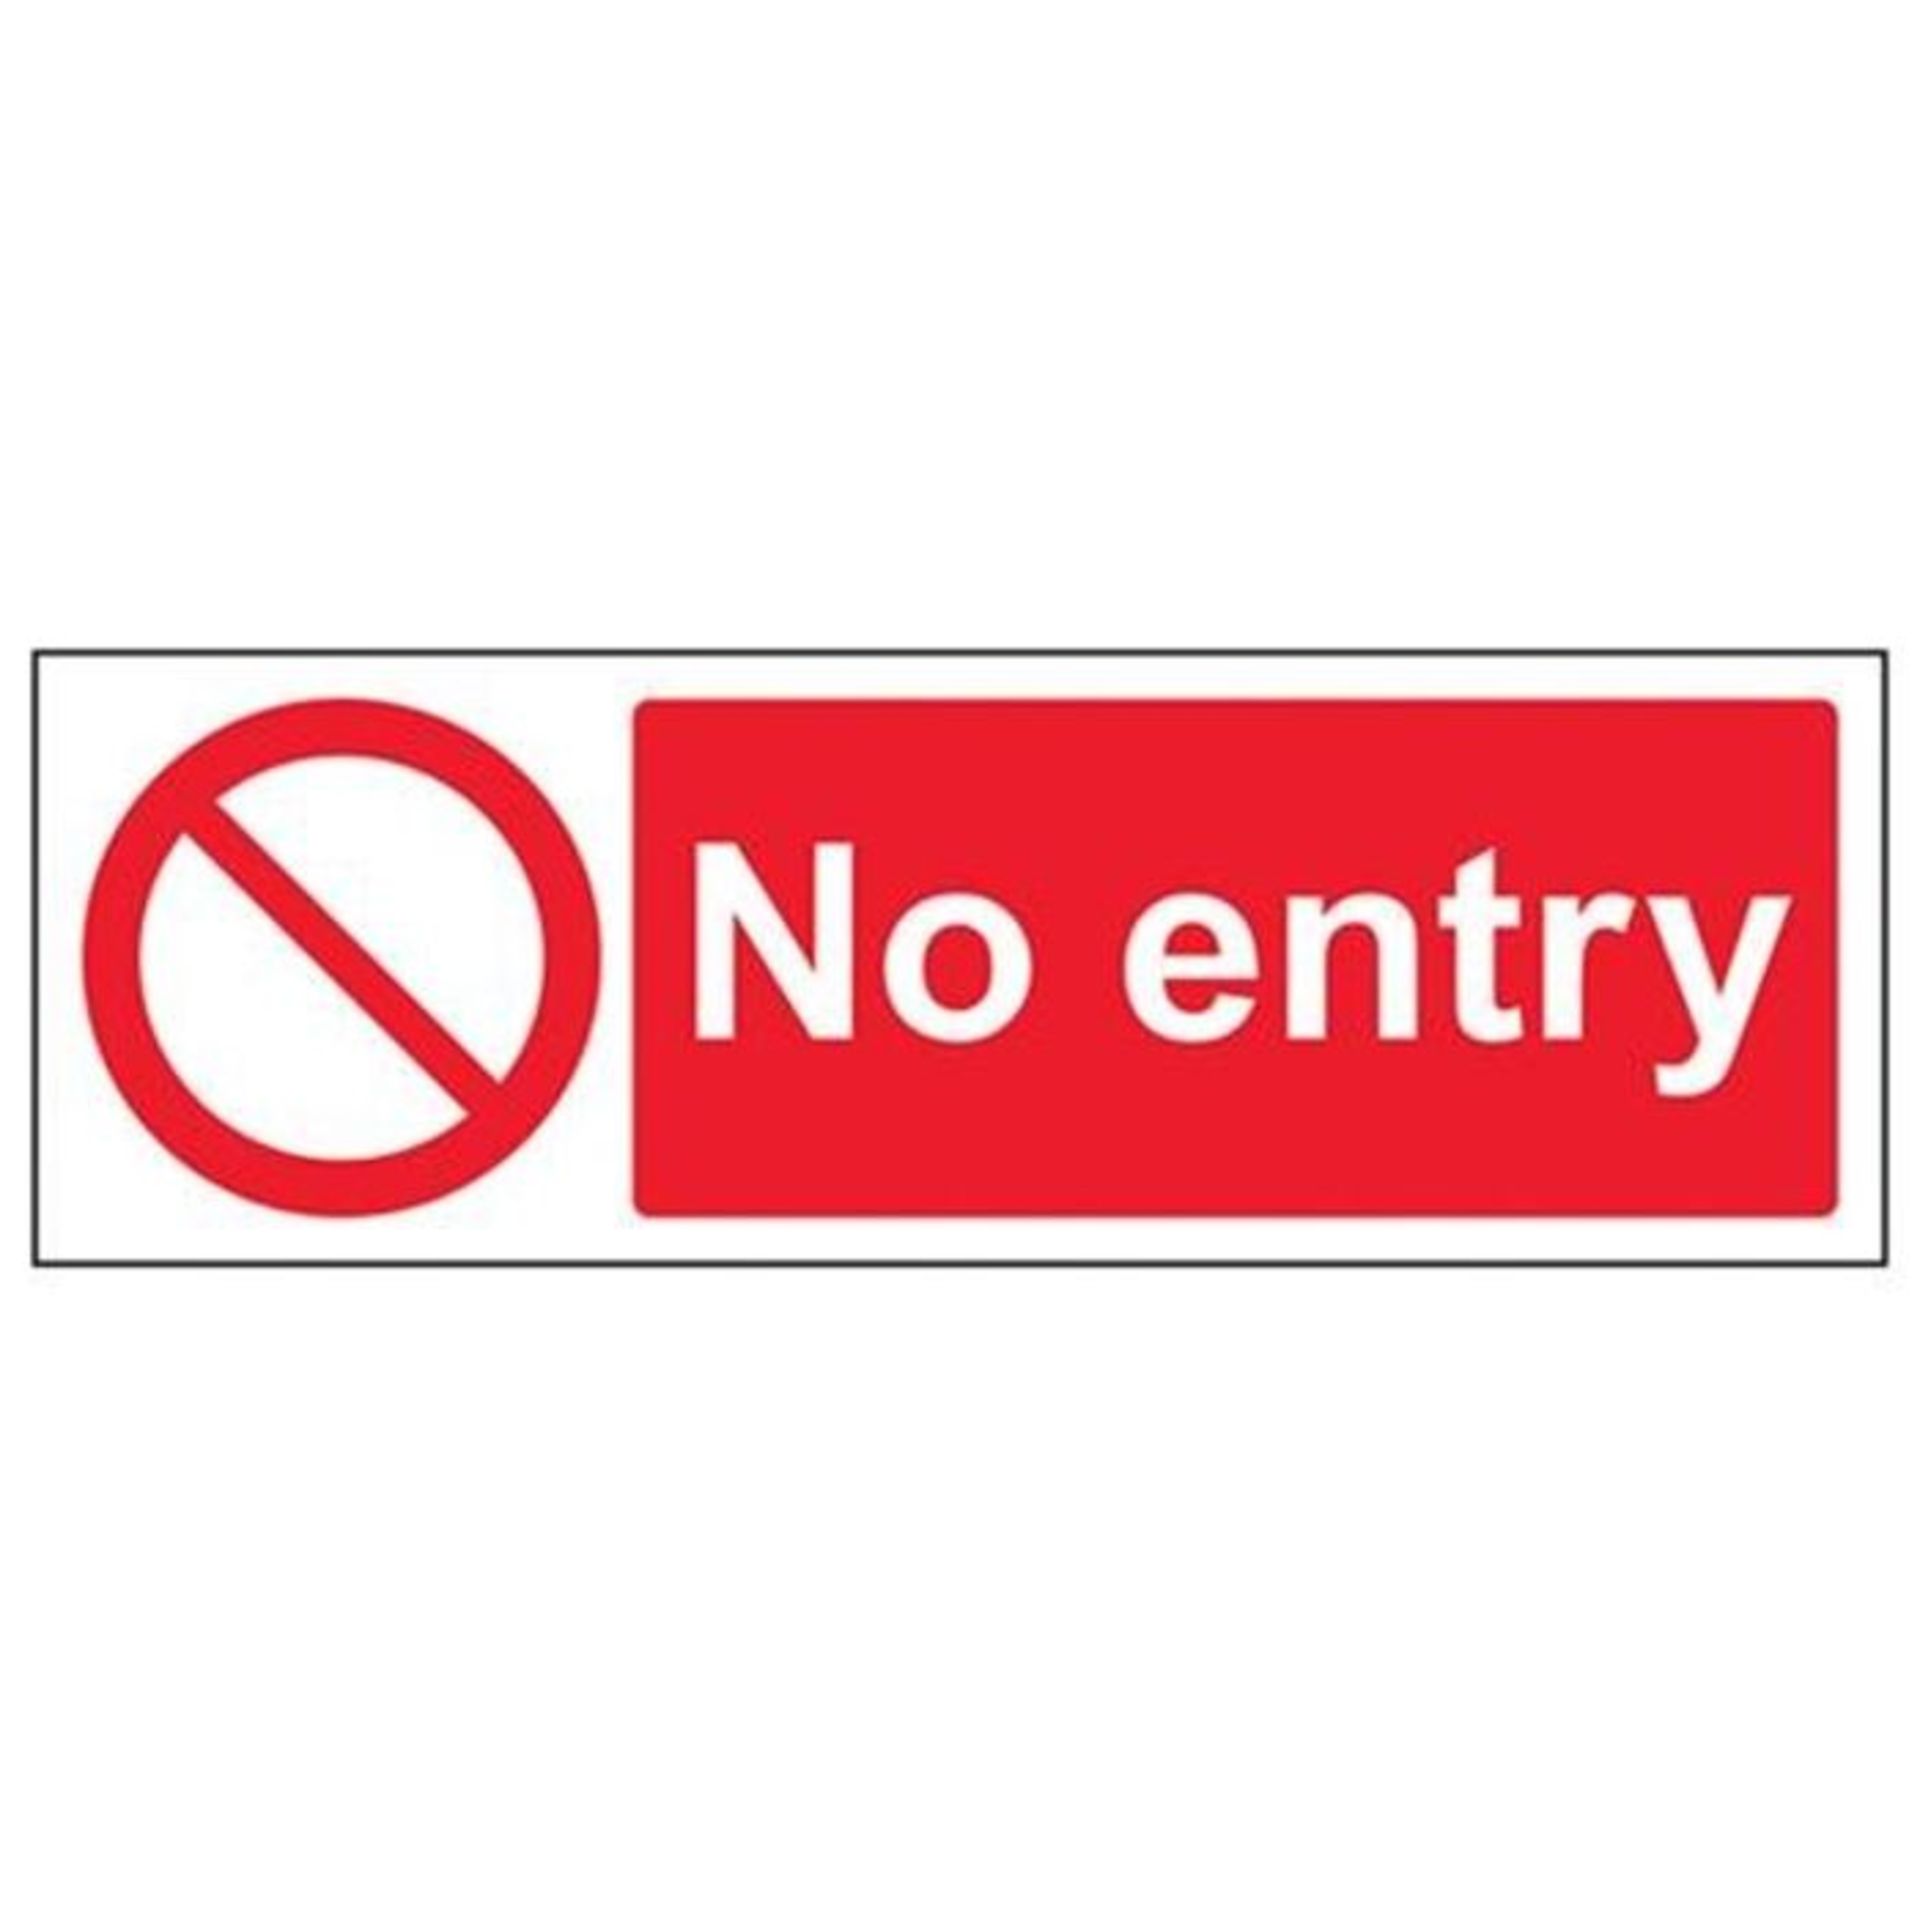 VSafety No Entry Prohibition Sign - Landscape - 300mm x 100mm - Self Adhesive Vinyl